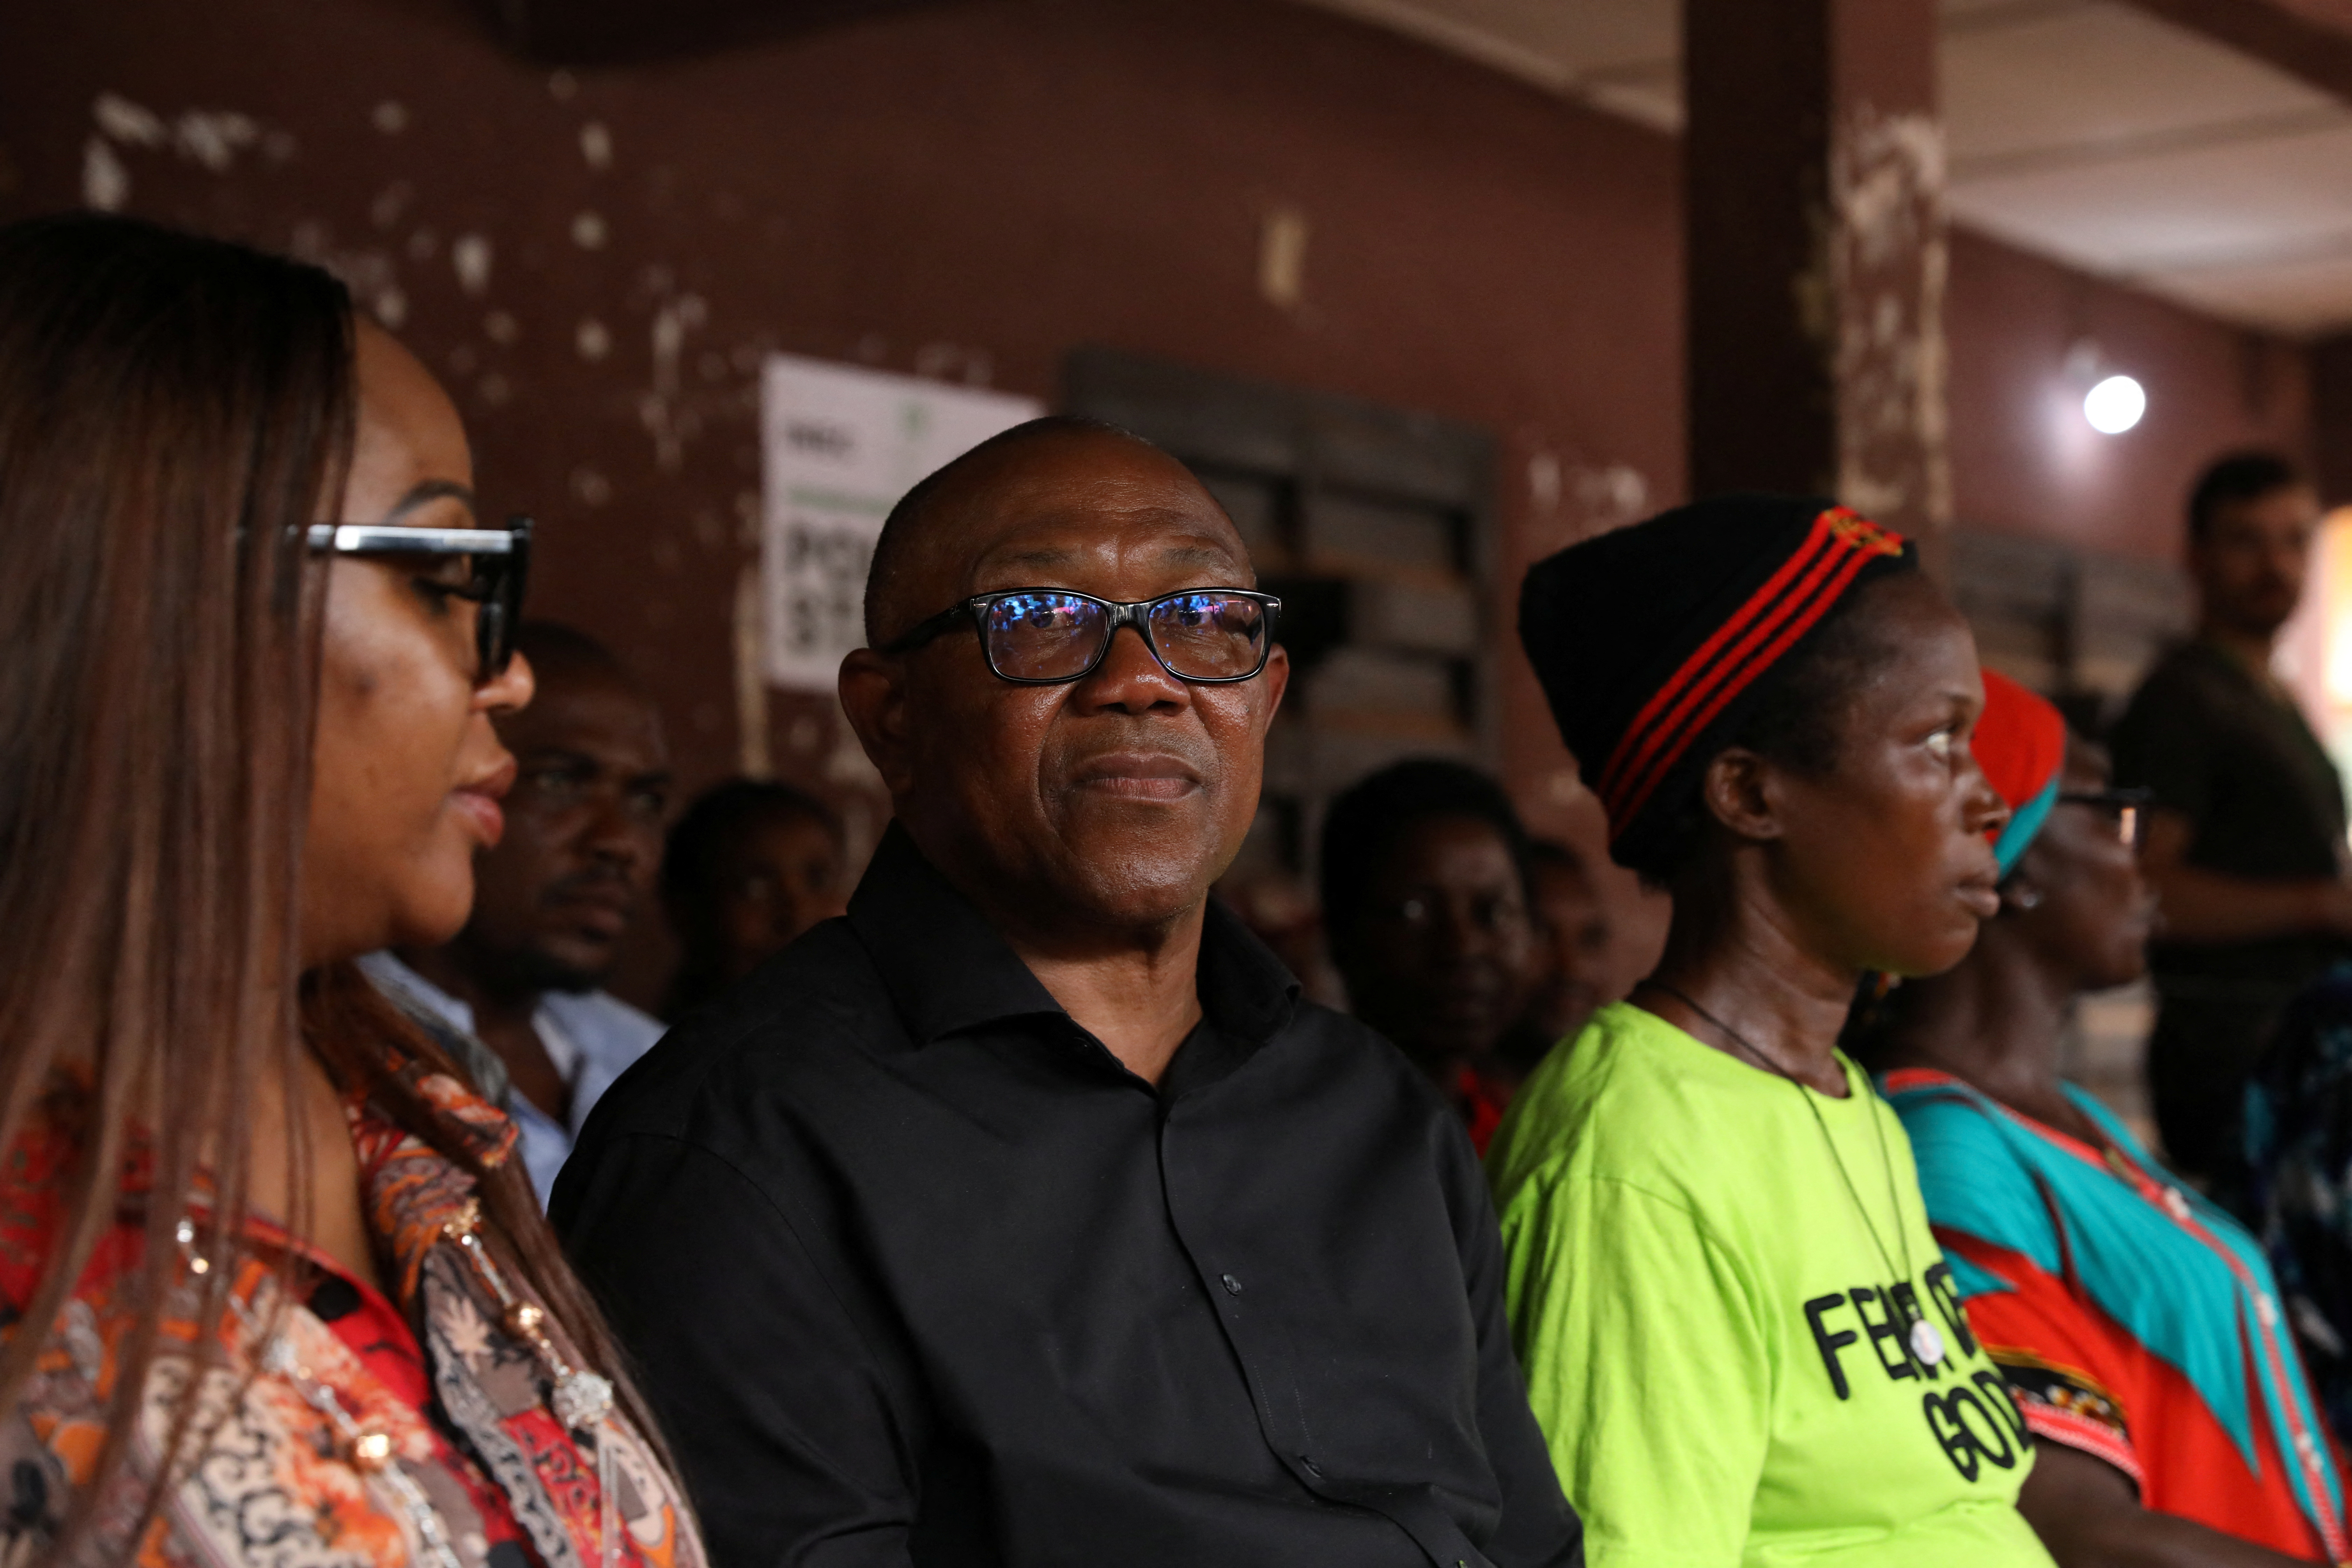 Labour Party (LP) Presidential candidate, Peter Obi, waits at a polling unit to cast his vote during Nigeria's presidential election in his hometown in Agulu